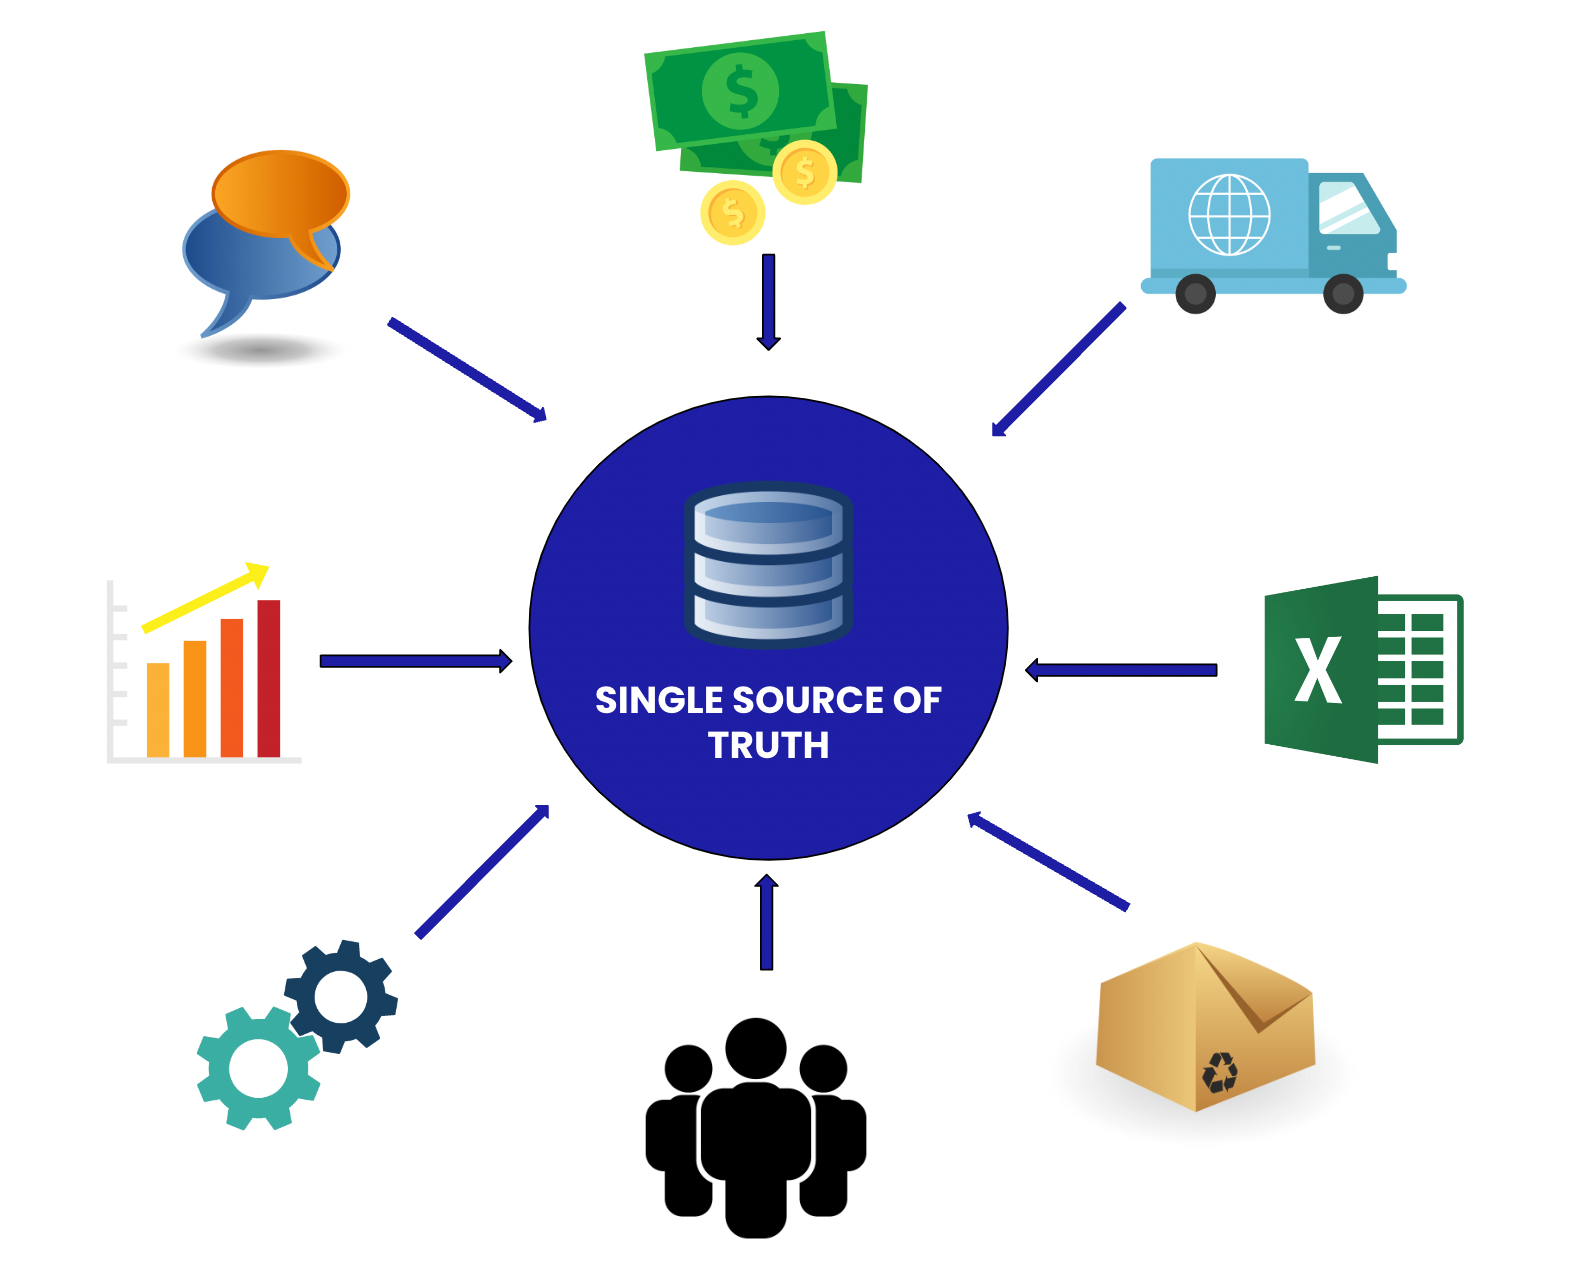 Single source of truth graphic with icons representing data sources